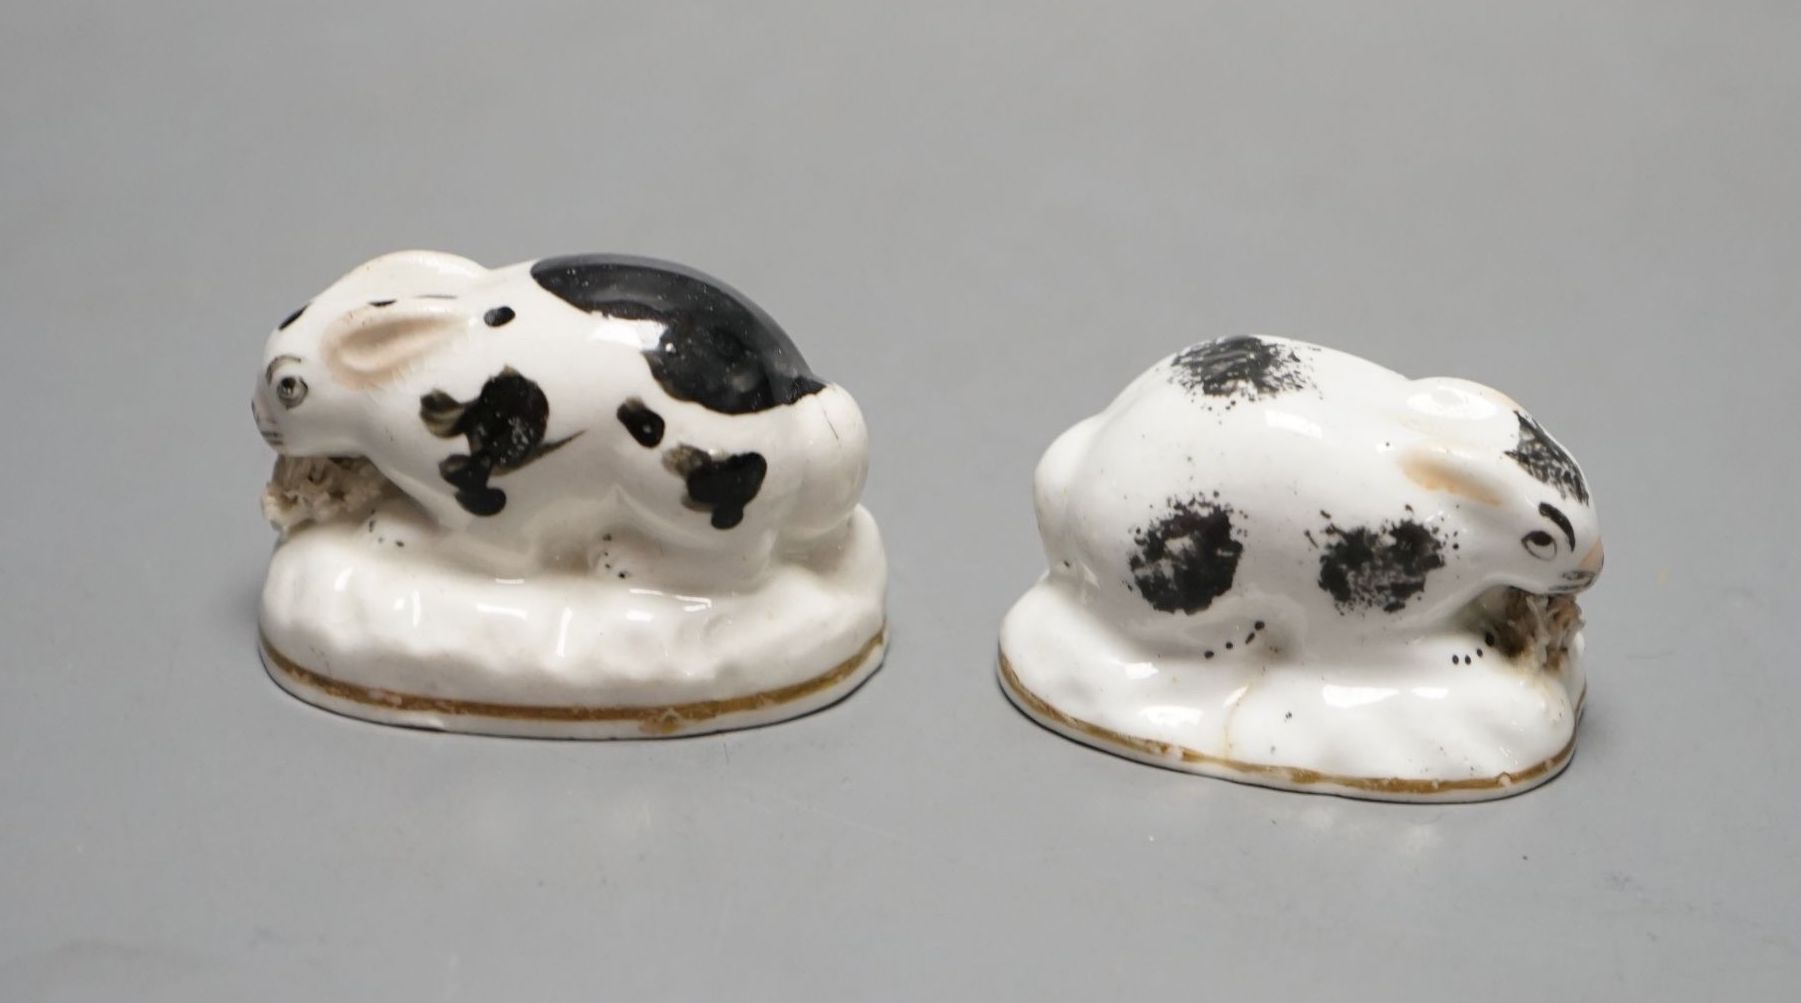 Two Staffordshire porcelain toy models of rabbits, c.1830–50, Provenance: Dennis G. Rice collection, 5 cms wide.